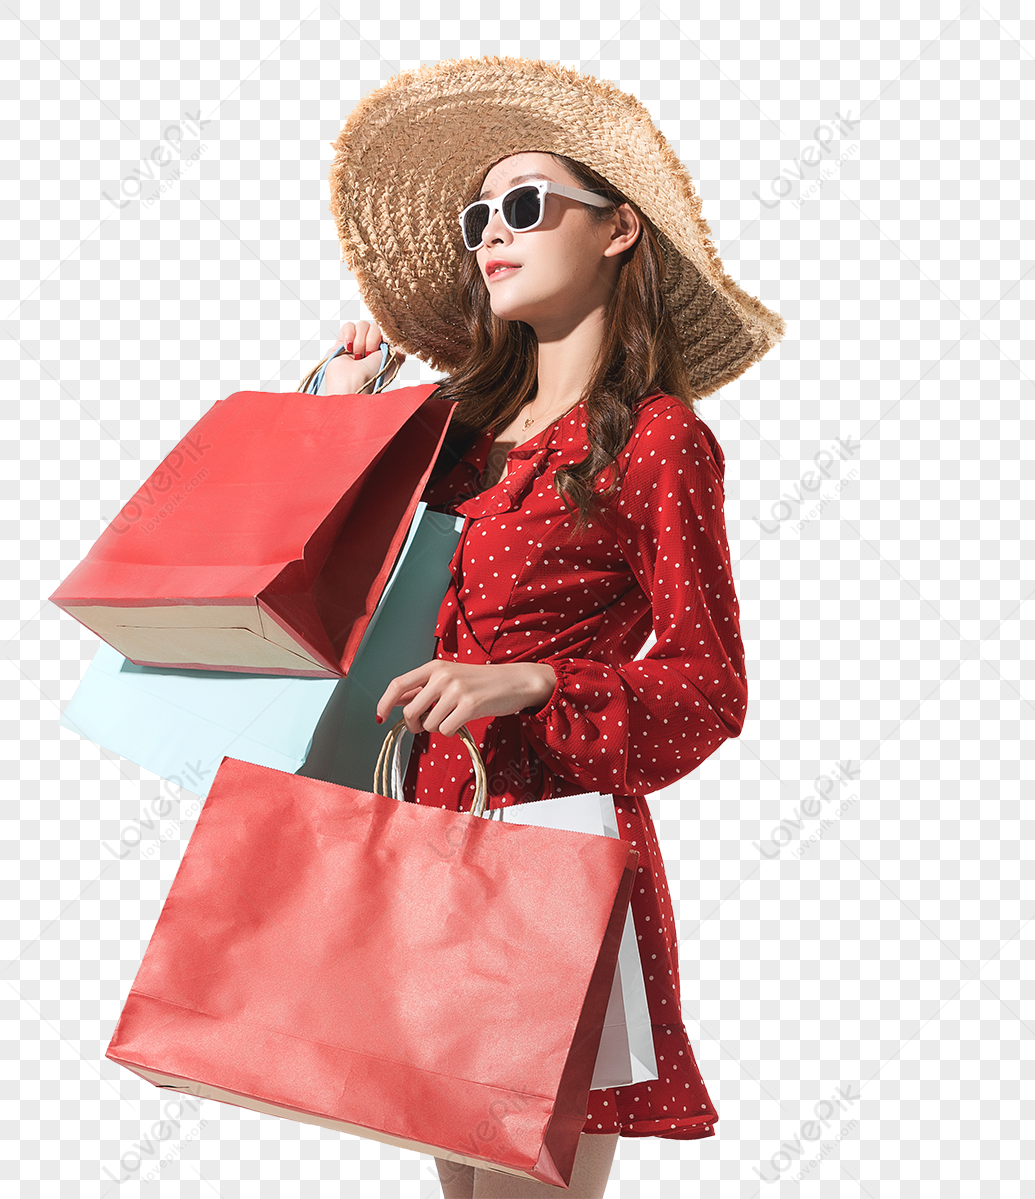 Online Shopping png download - 2067*1563 - Free Transparent Clothing png  Download. - CleanPNG / KissPNG